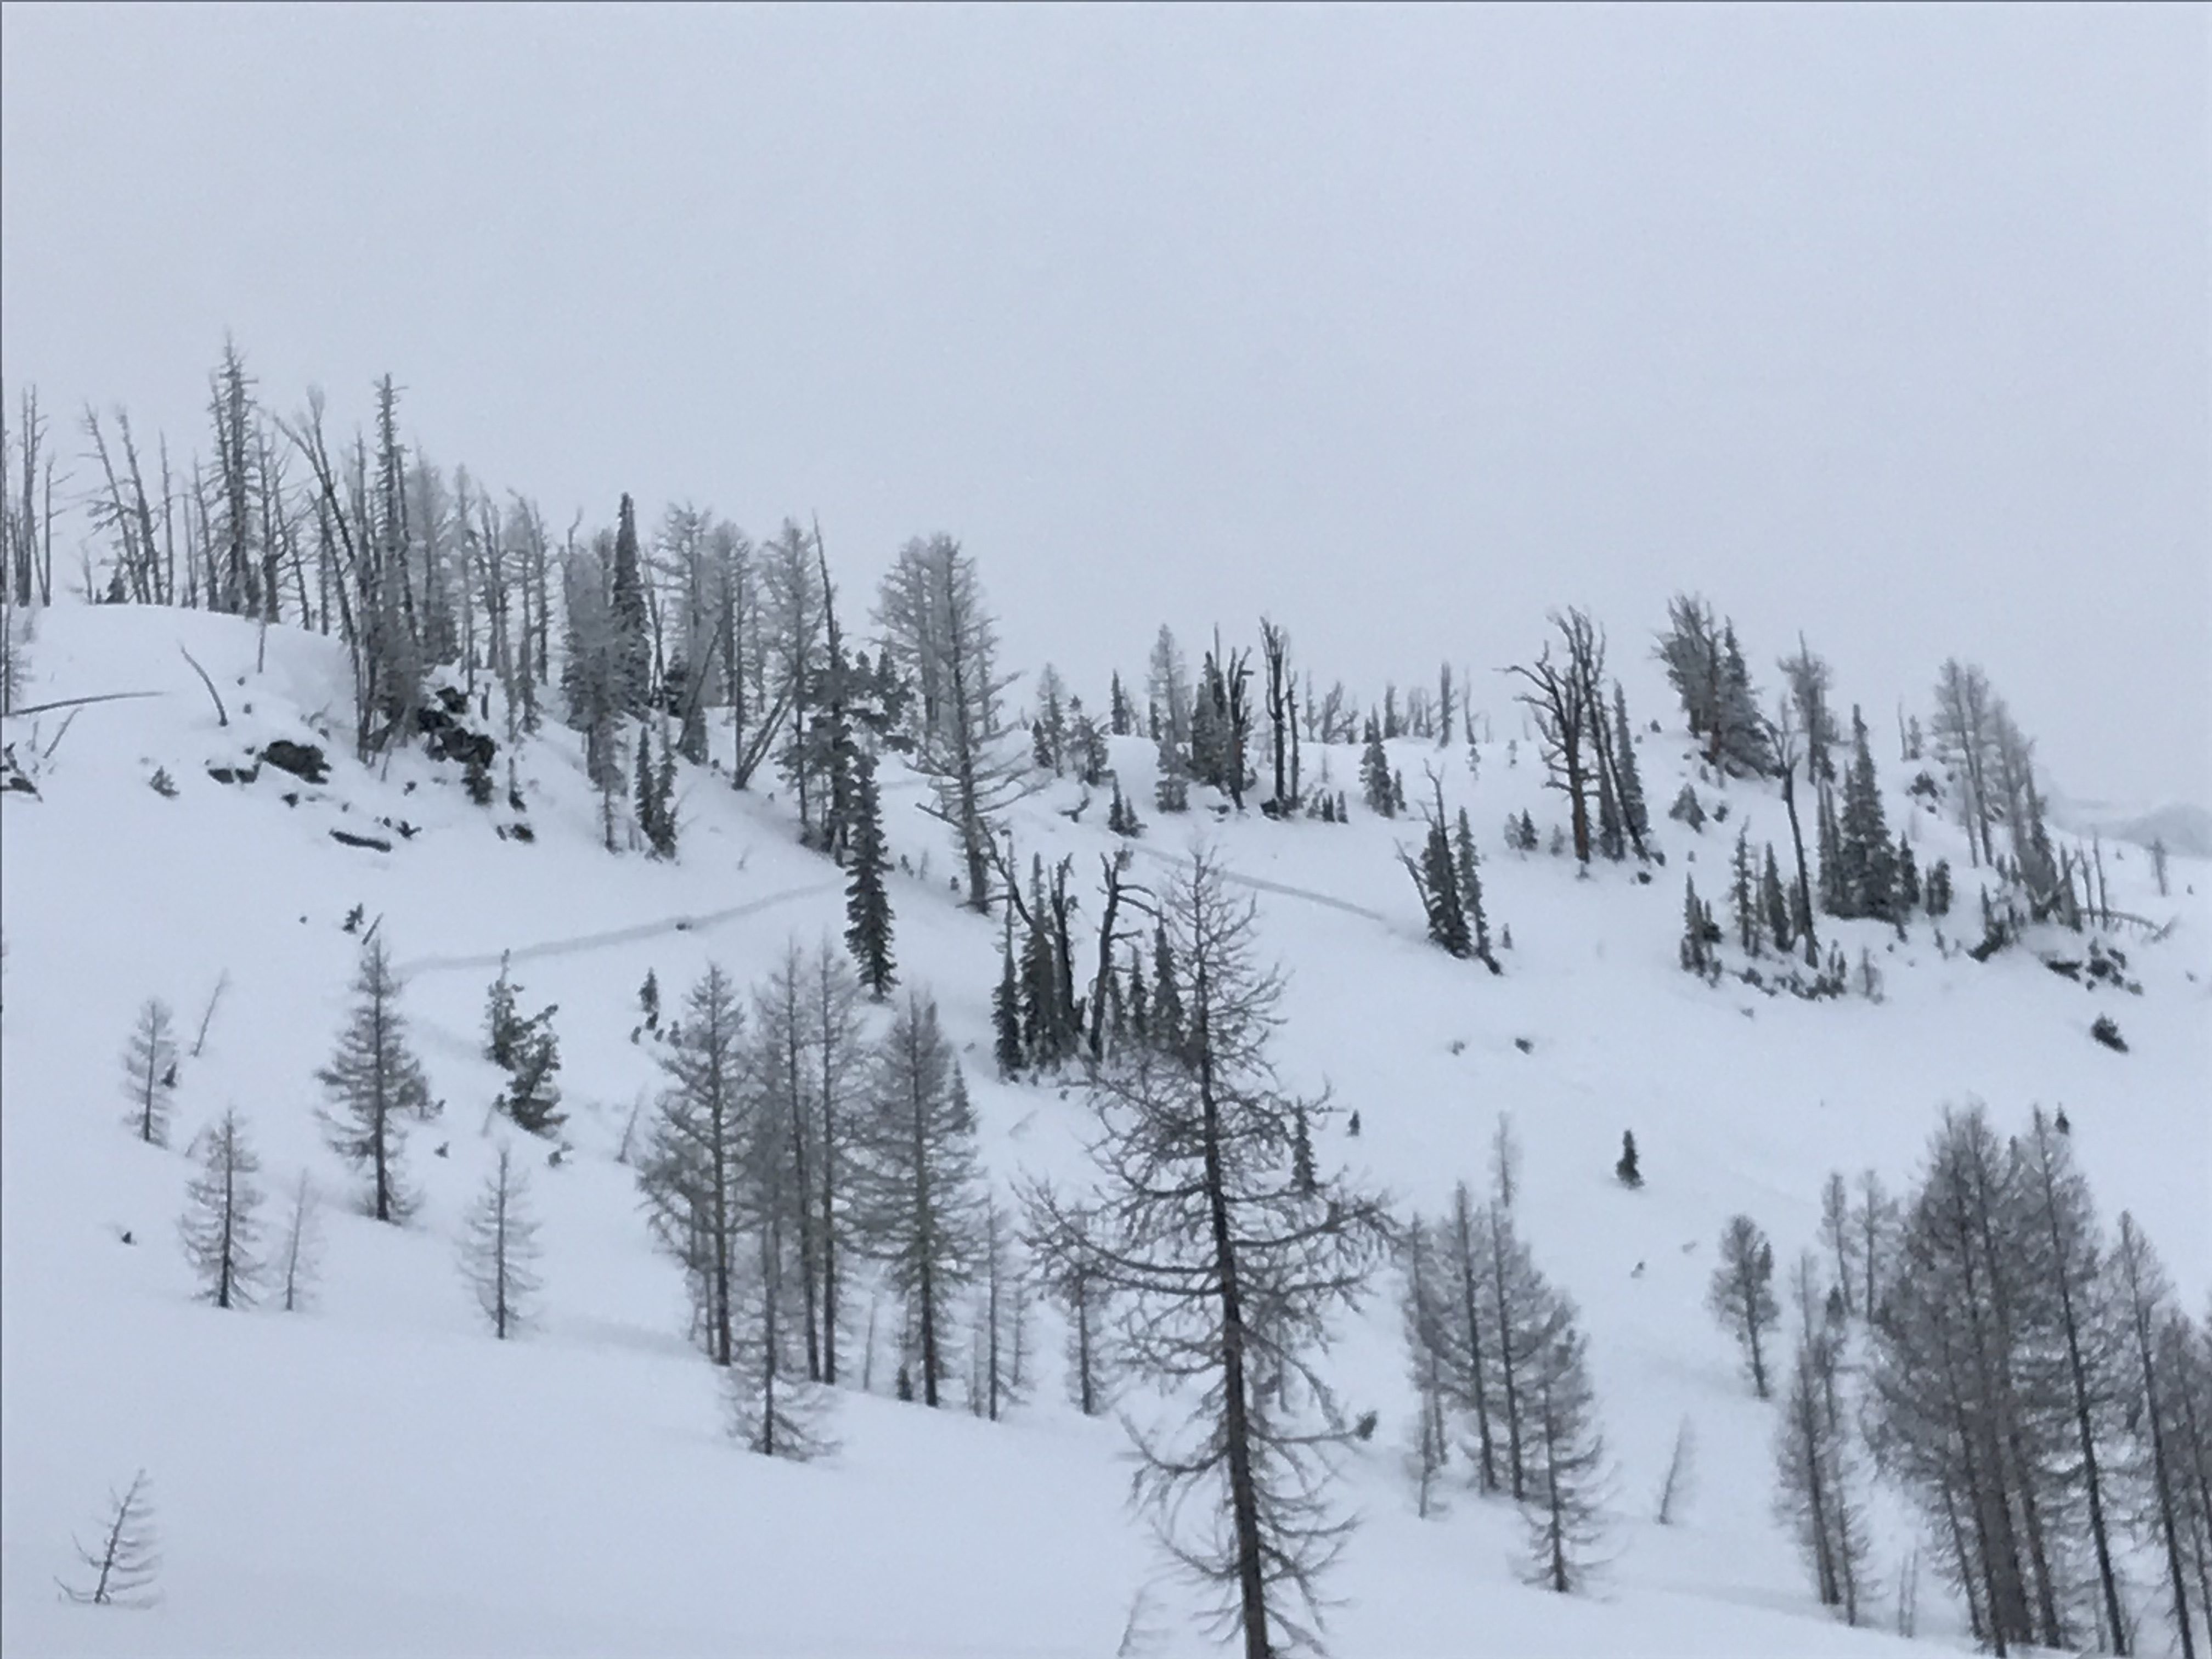 : <p>Windslab that was triggered by a skier near Gash on 12/19/18</p>
